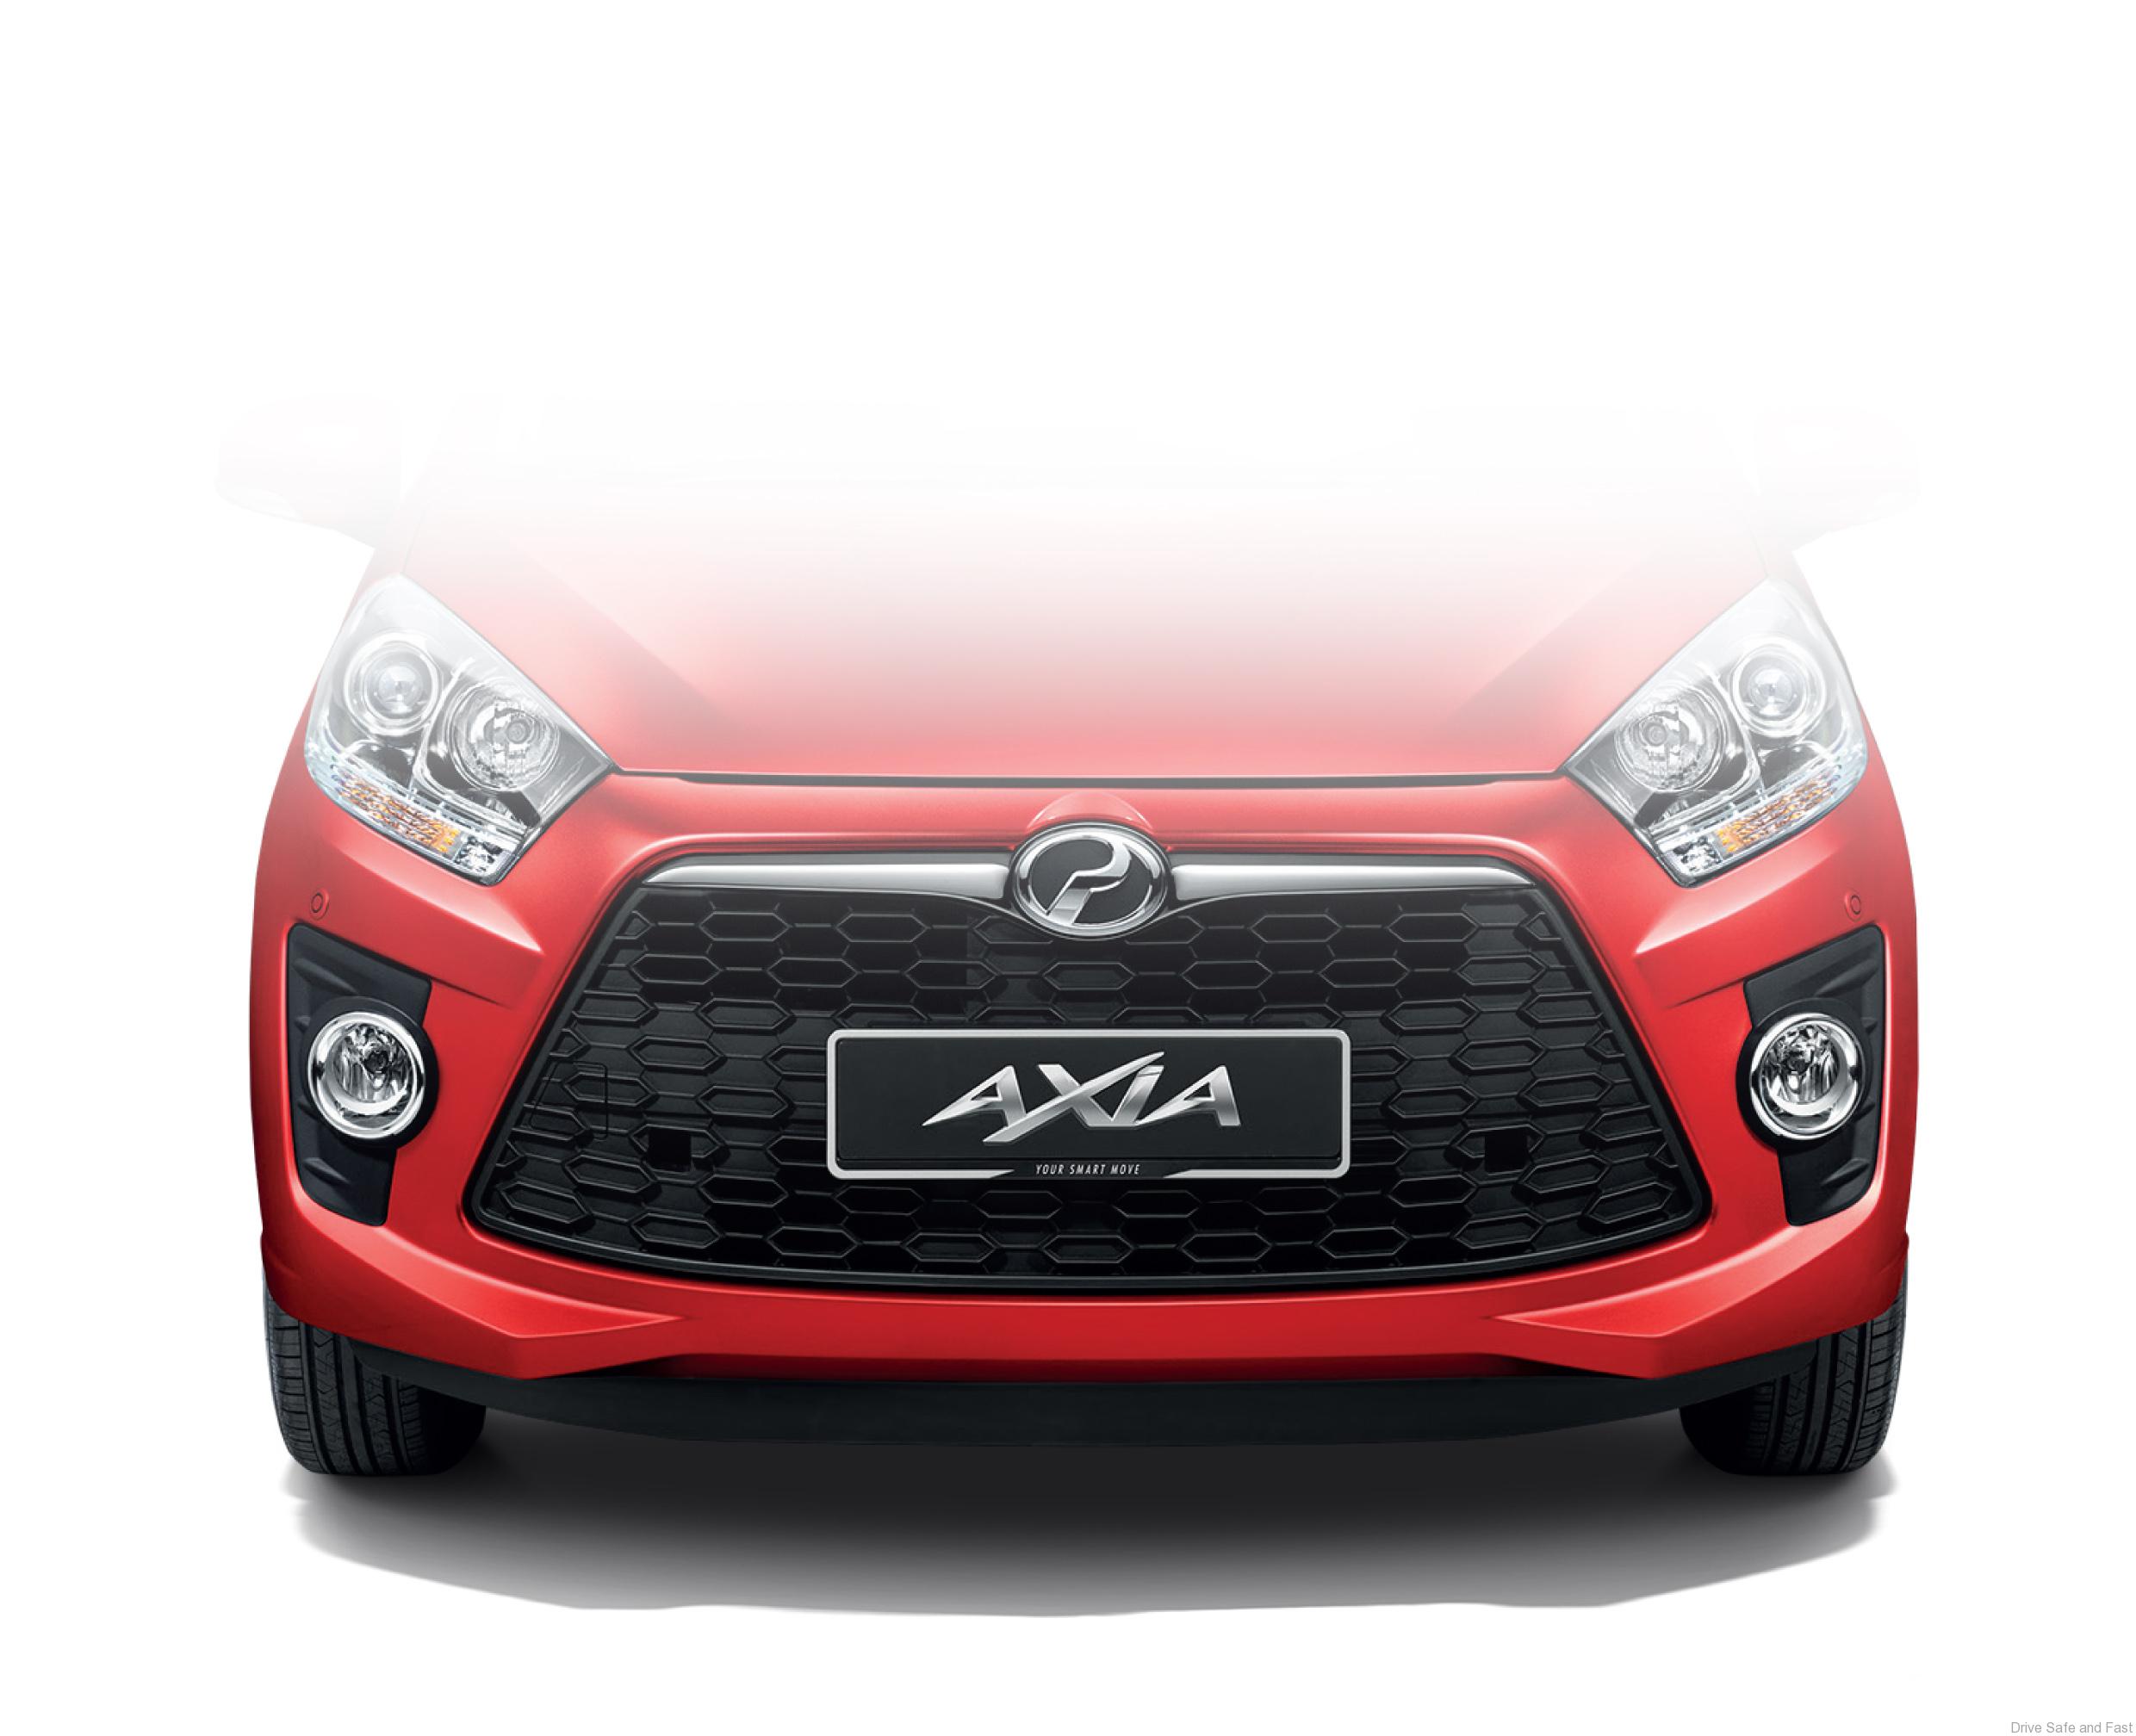 Perodua Axia Details Revealed – Drive Safe and Fast